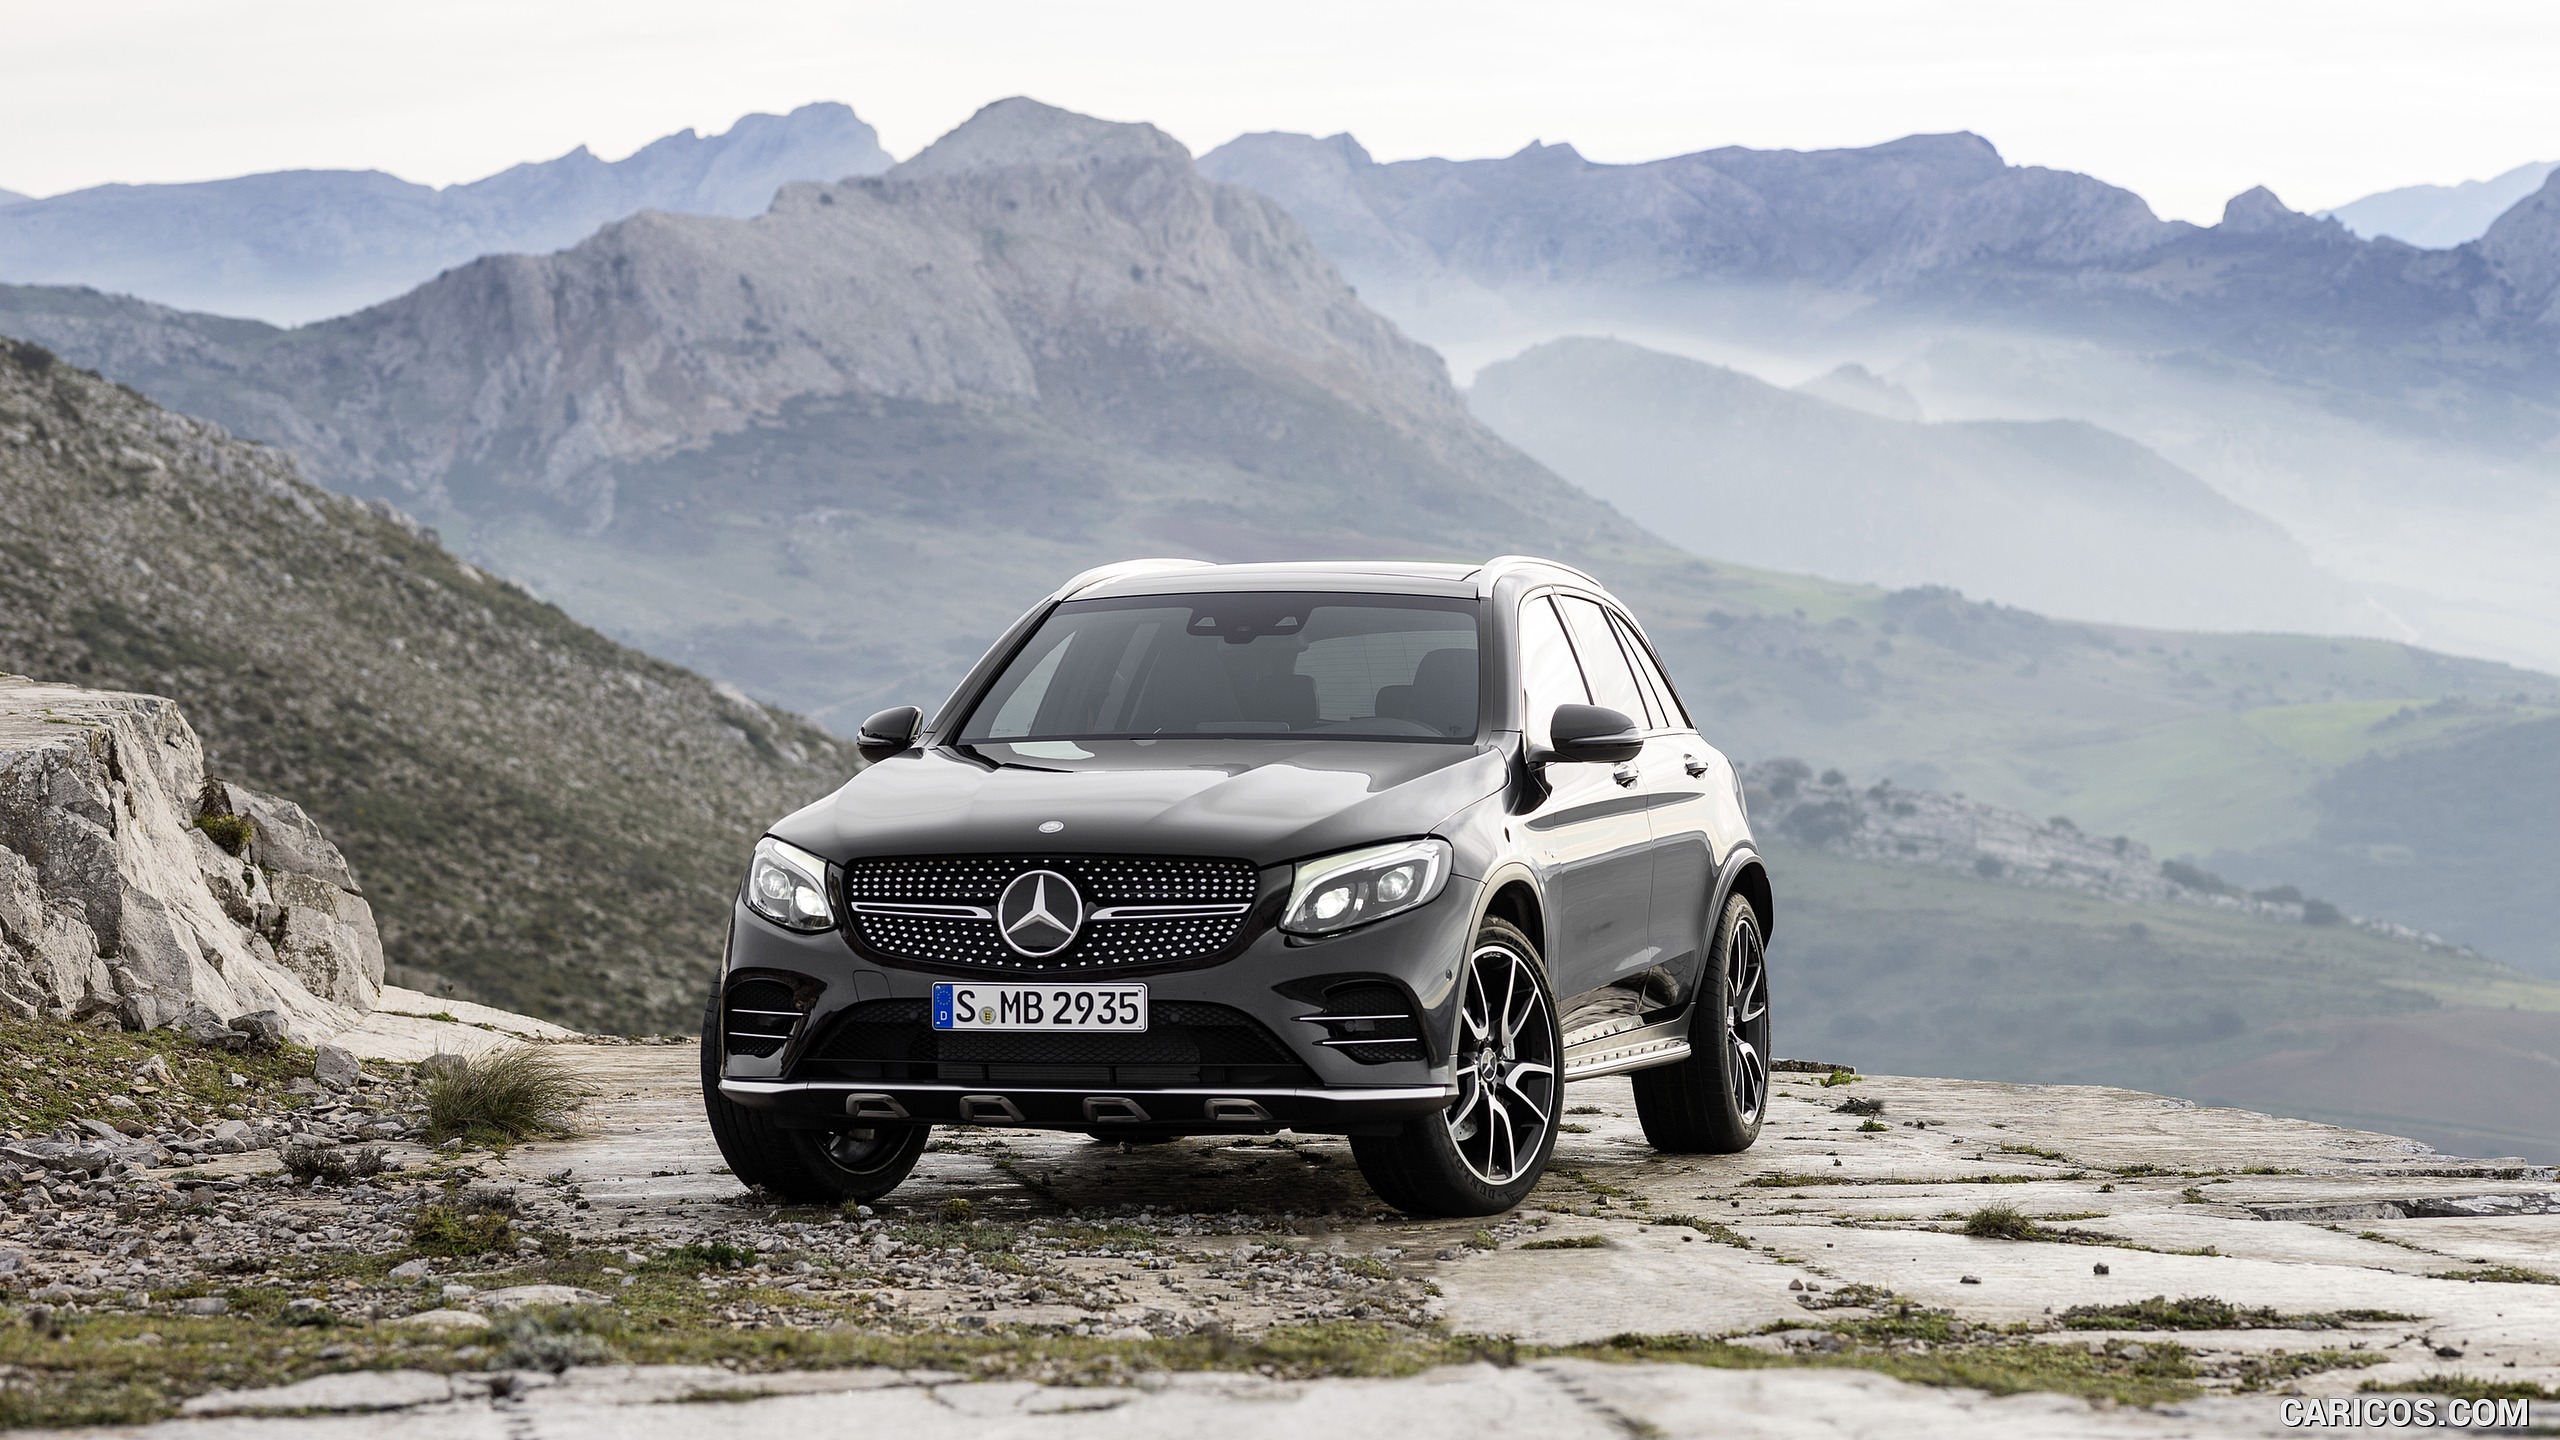 2017 Mercedes-AMG GLC 43 4MATIC (Chassis: X253, Color: Obsidian Black) - Front, #17 of 108